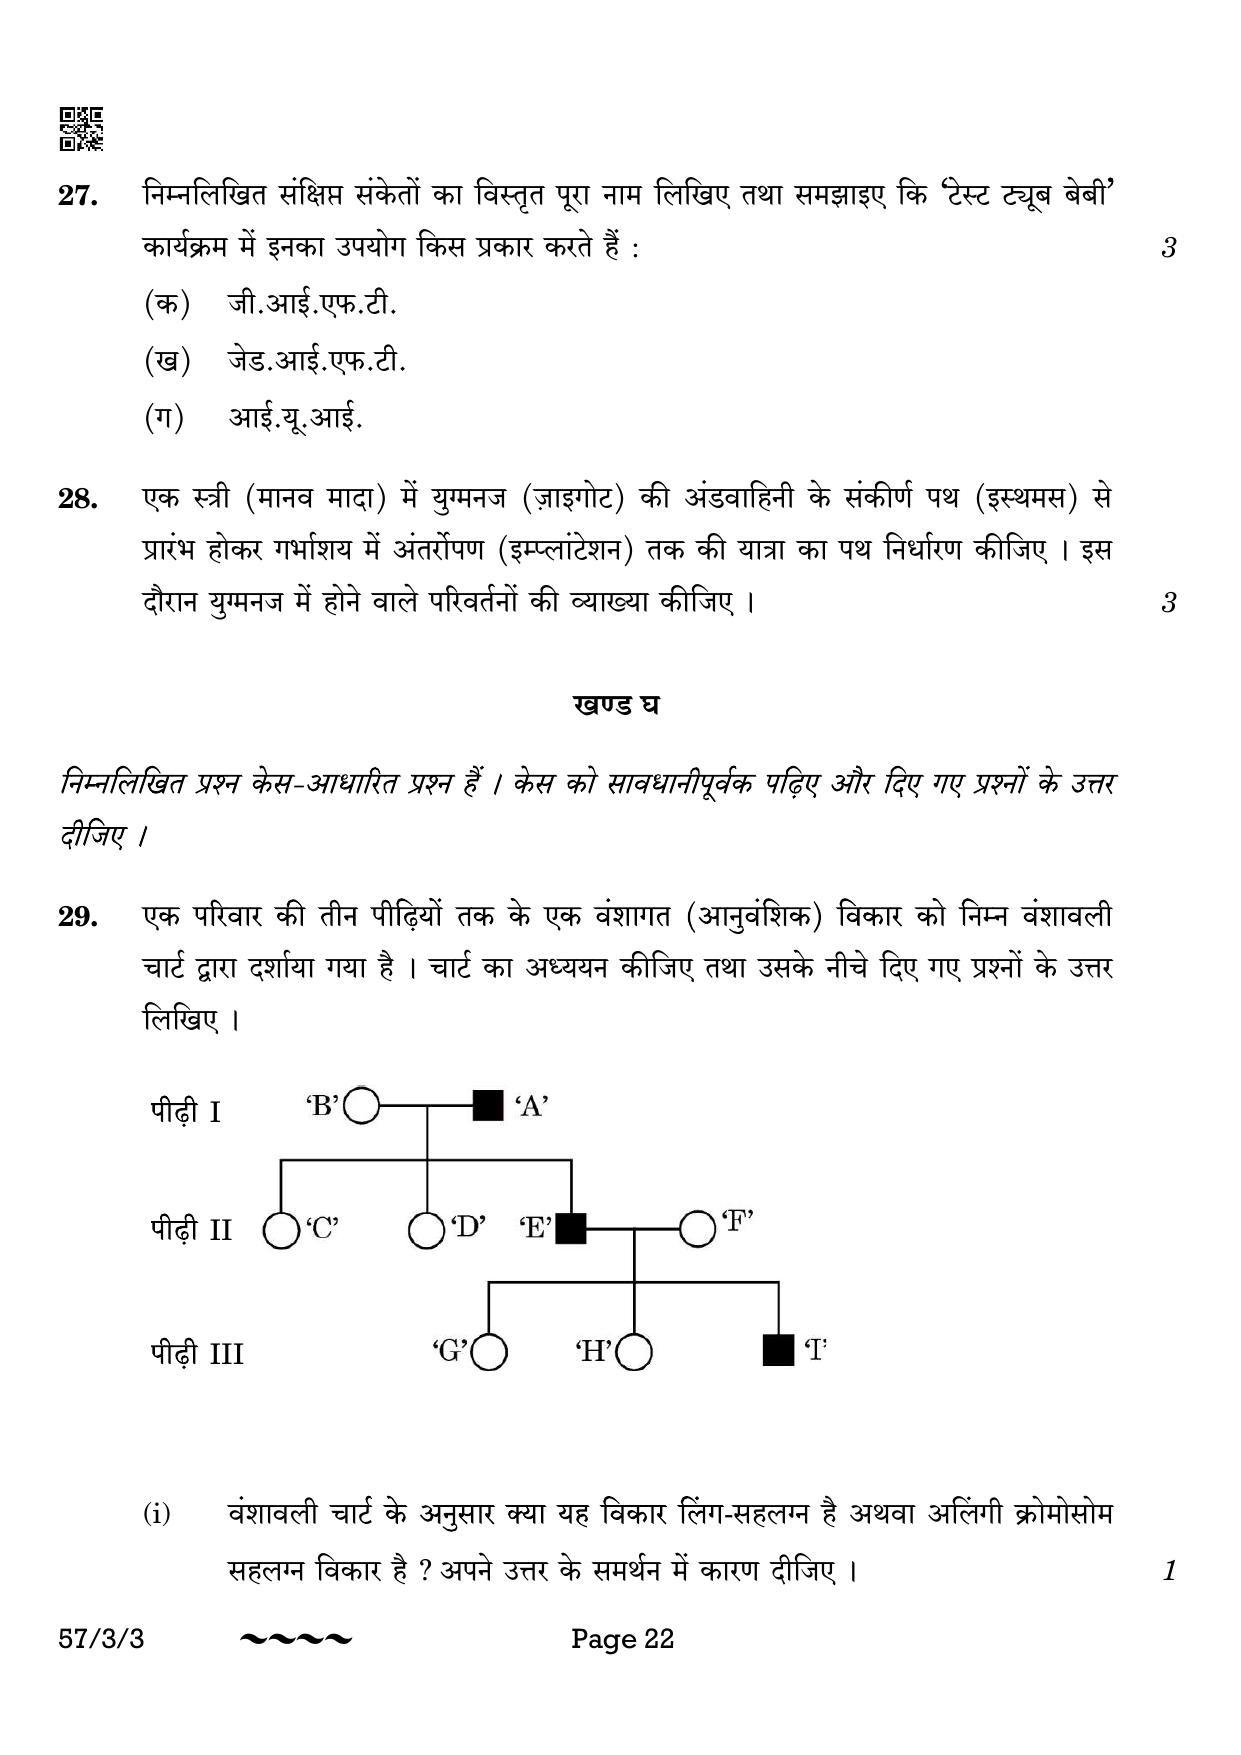 CBSE Class 12 57-3-3 Biology 2023 Question Paper - Page 22